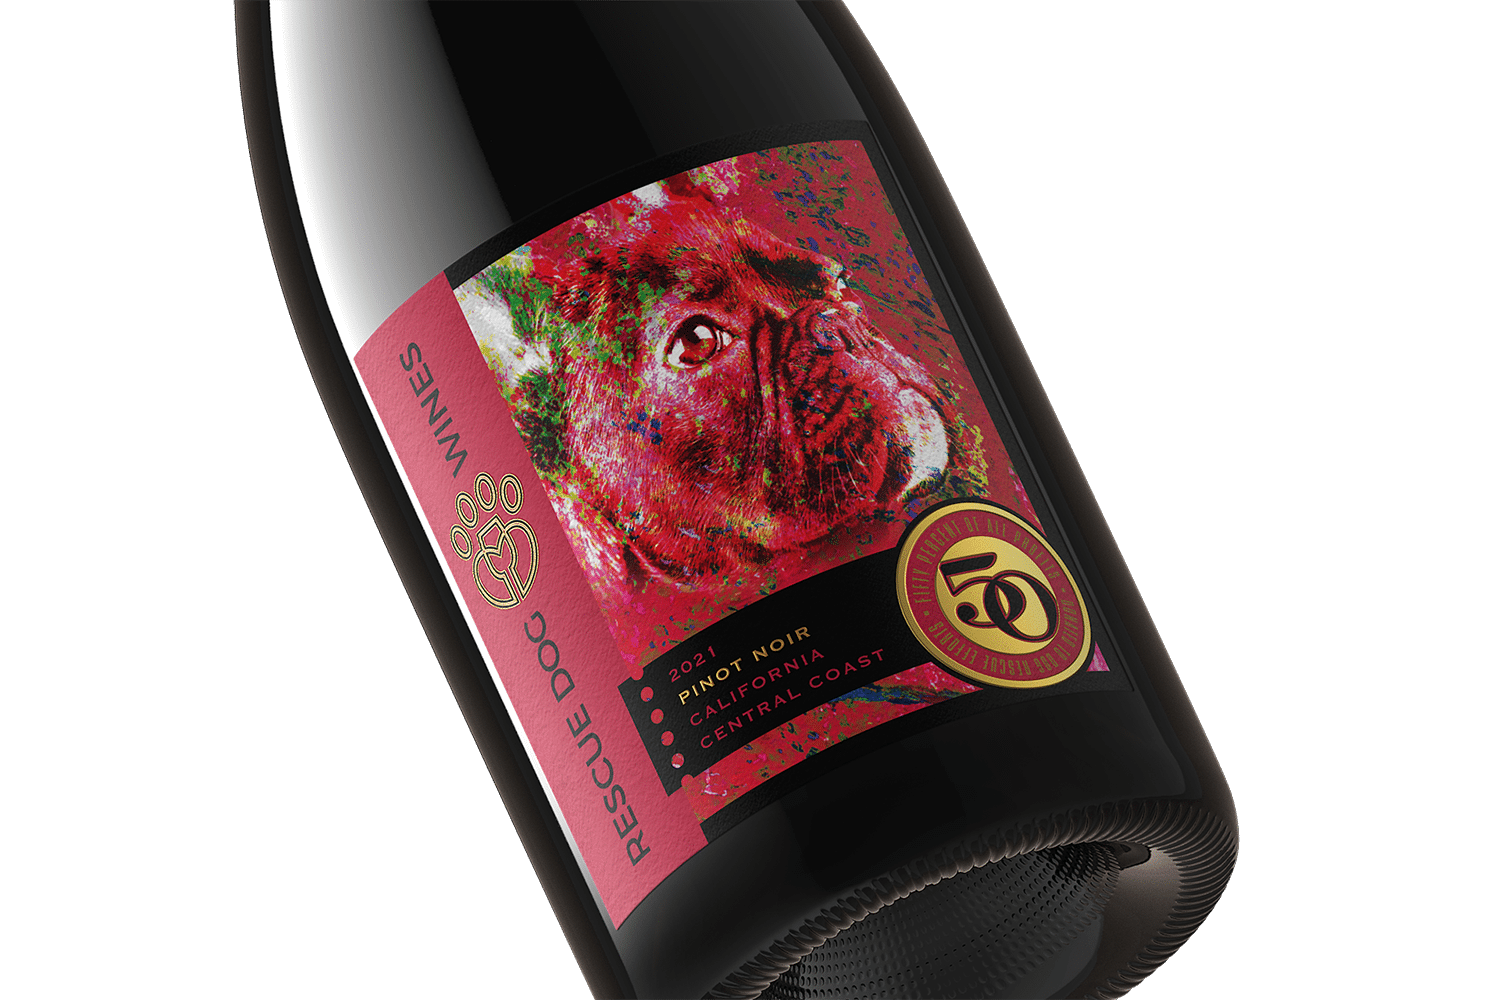 2021 Pinot Noir | Rescue Dog Wines